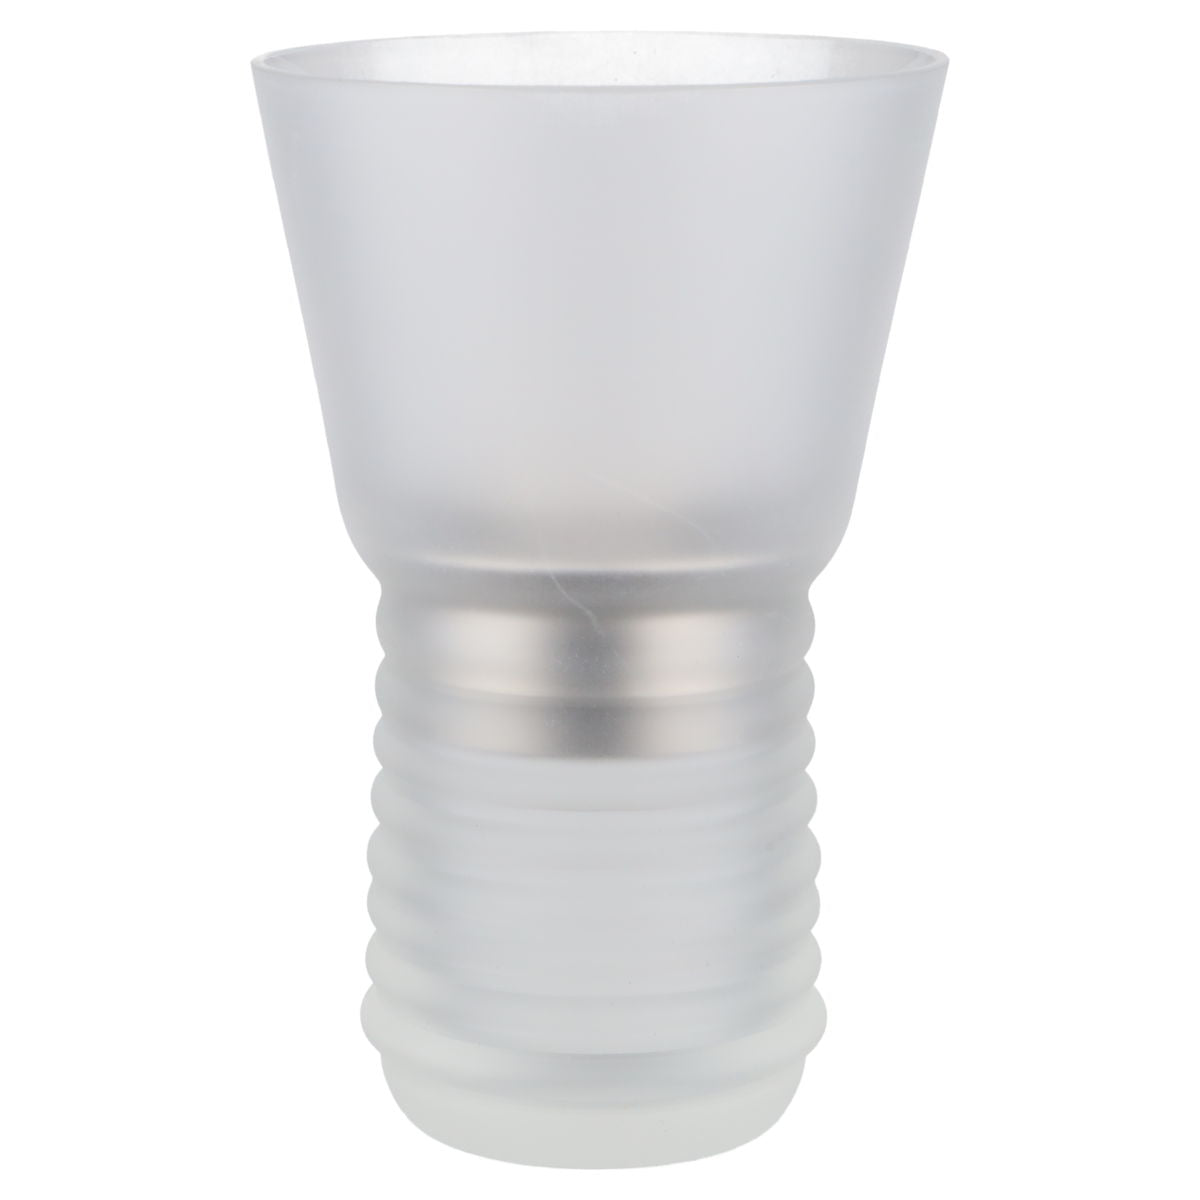 Duftlampe Glasbehälter Frosted White OVP